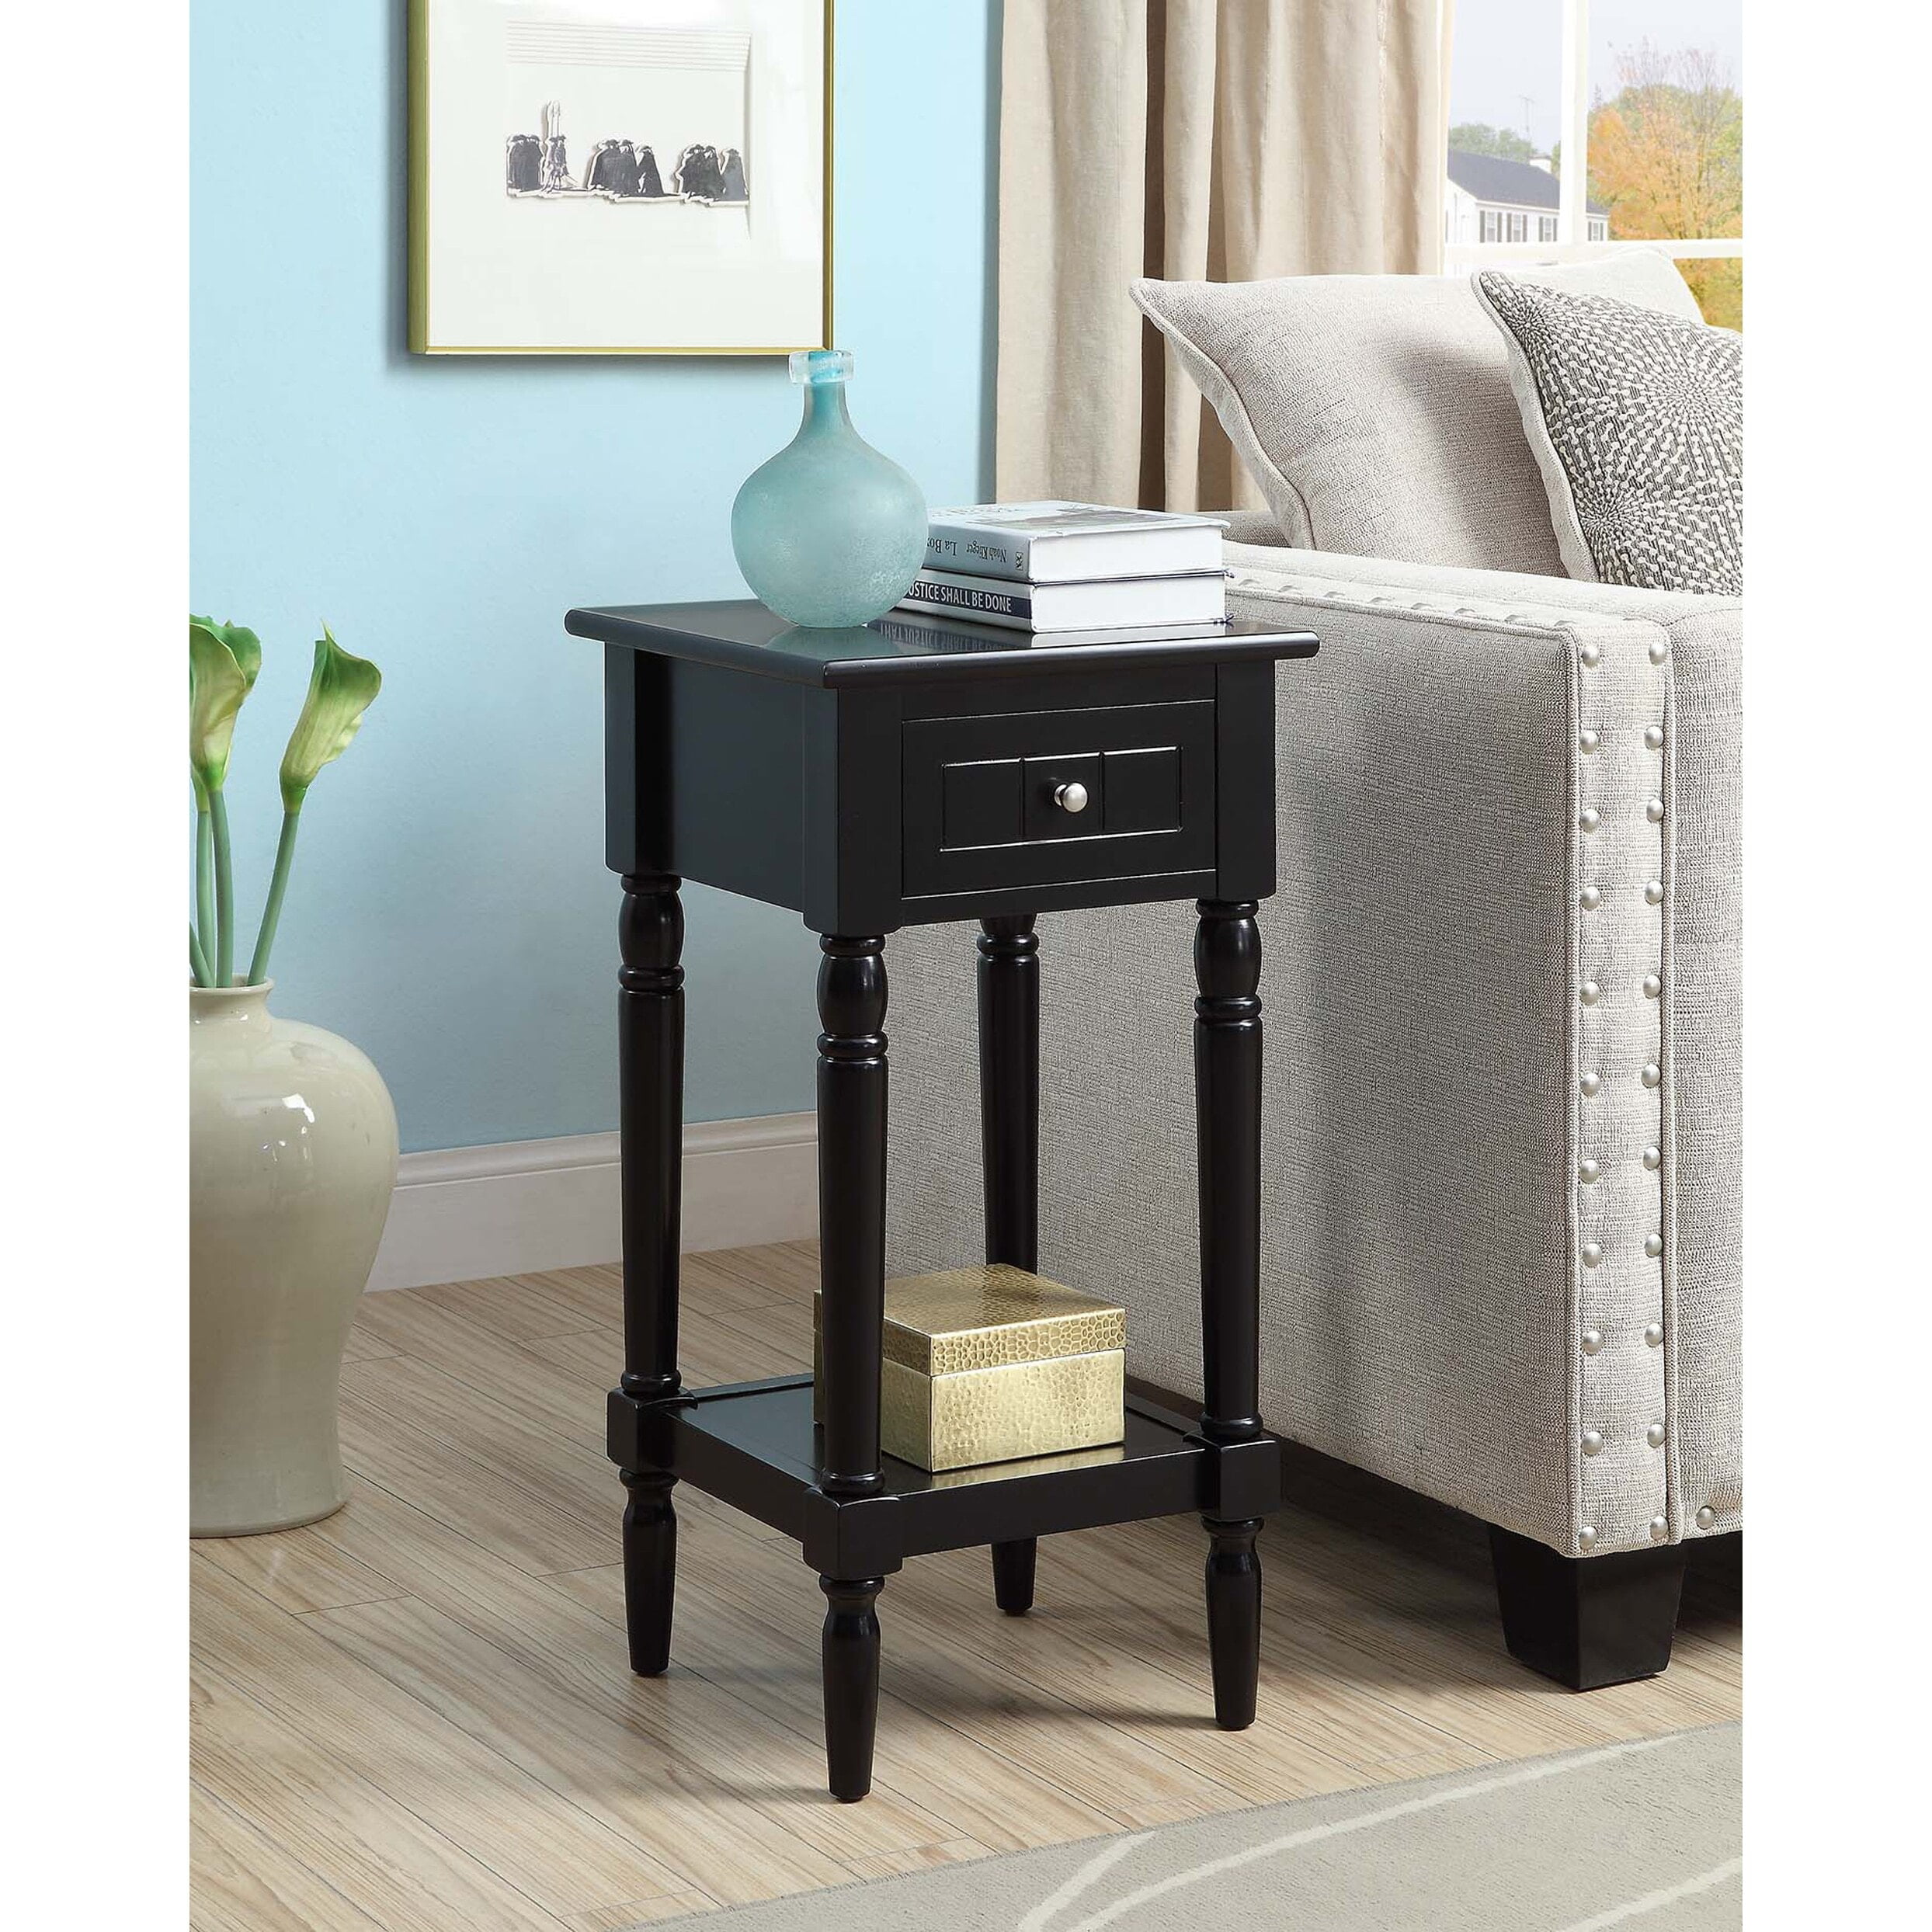 Details about   Copper Grove Dalem French Country Accent Table 